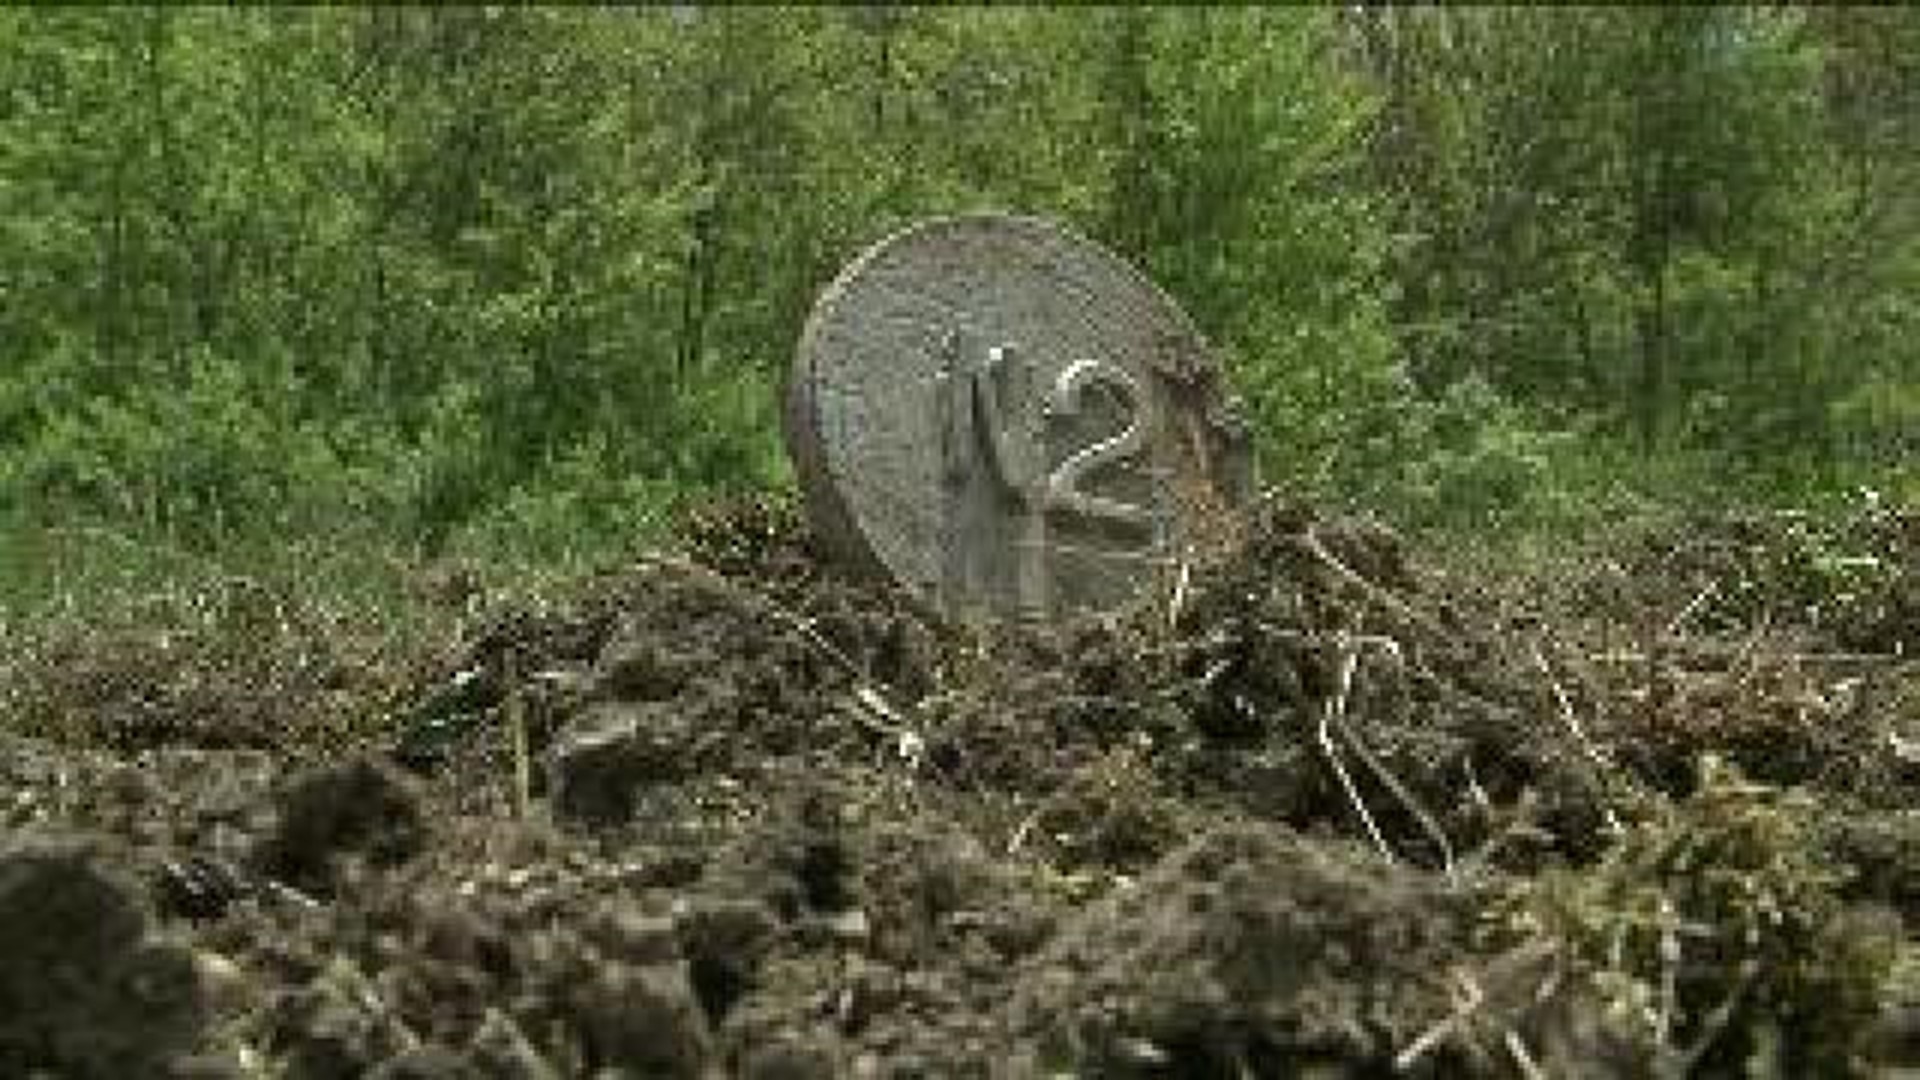 Cemetery Damaged by Vandals